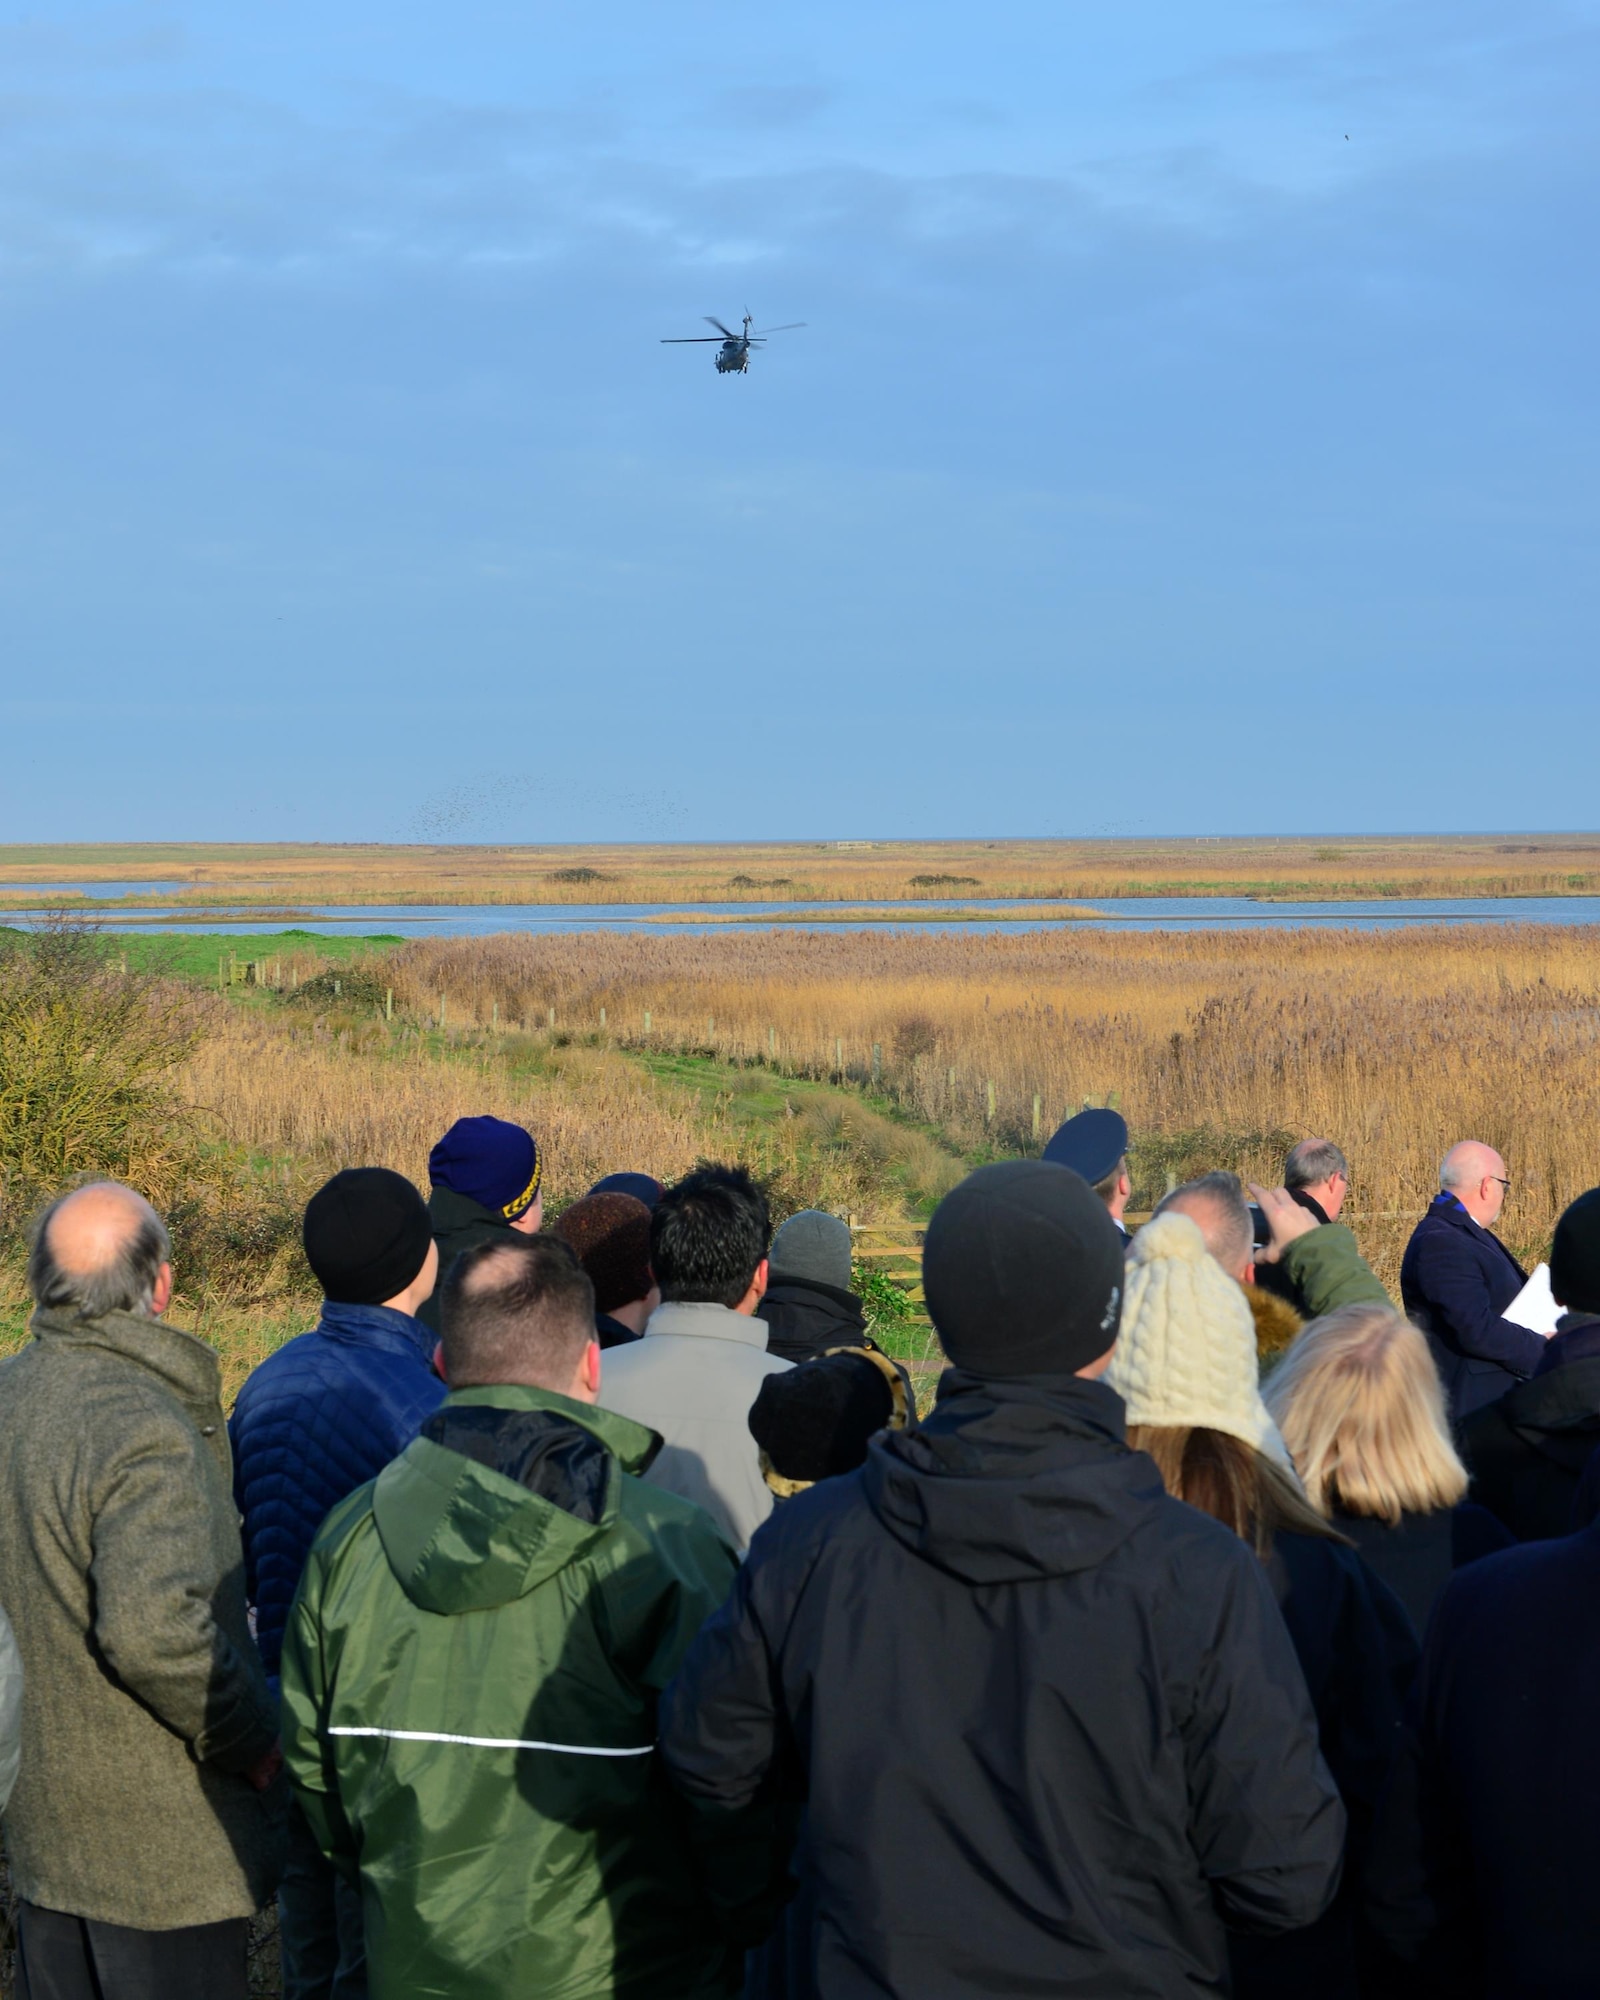 Family, friends, U.S. Airmen and U.K. community members gather at Cley-Next-the-Sea to watch an HH-60G Pave Hawk flyover during a memorial ceremony Jan. 6, 2017. A memorial stone was dedicated to the four aircrew members who made the ultimate sacrifice during a low-level training mission on Jan. 7, 2014. (U.S. Air Force photo by Staff Sgt. Stephanie Longoria)